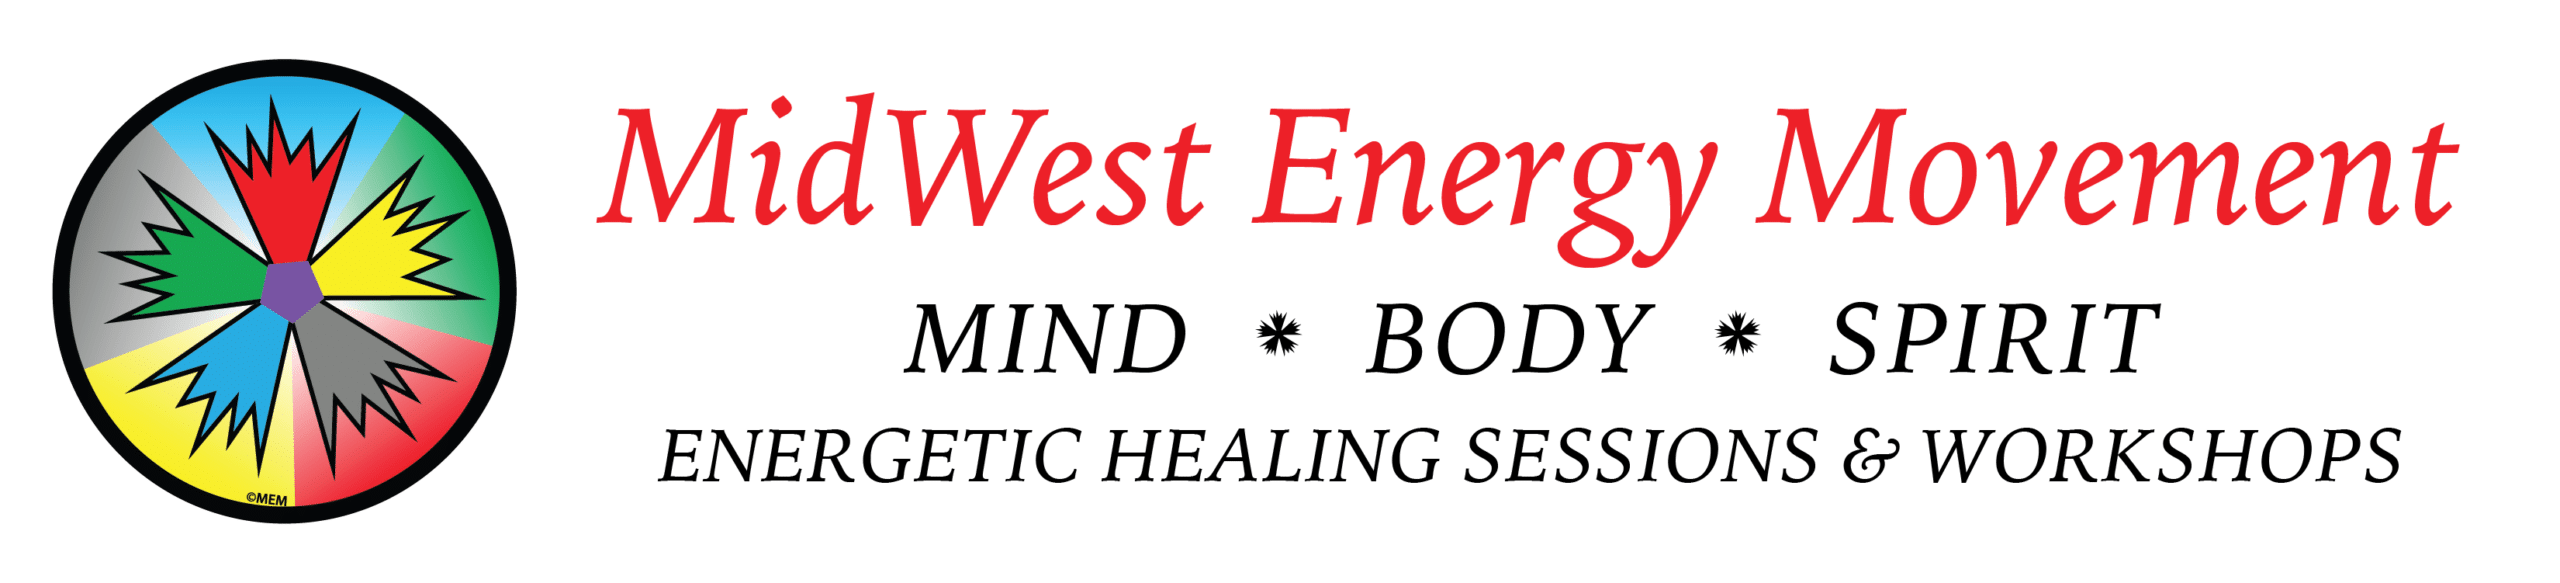 Midwest Energy Movement - Mind Body Spirit, energetic healing sessions and workshops.